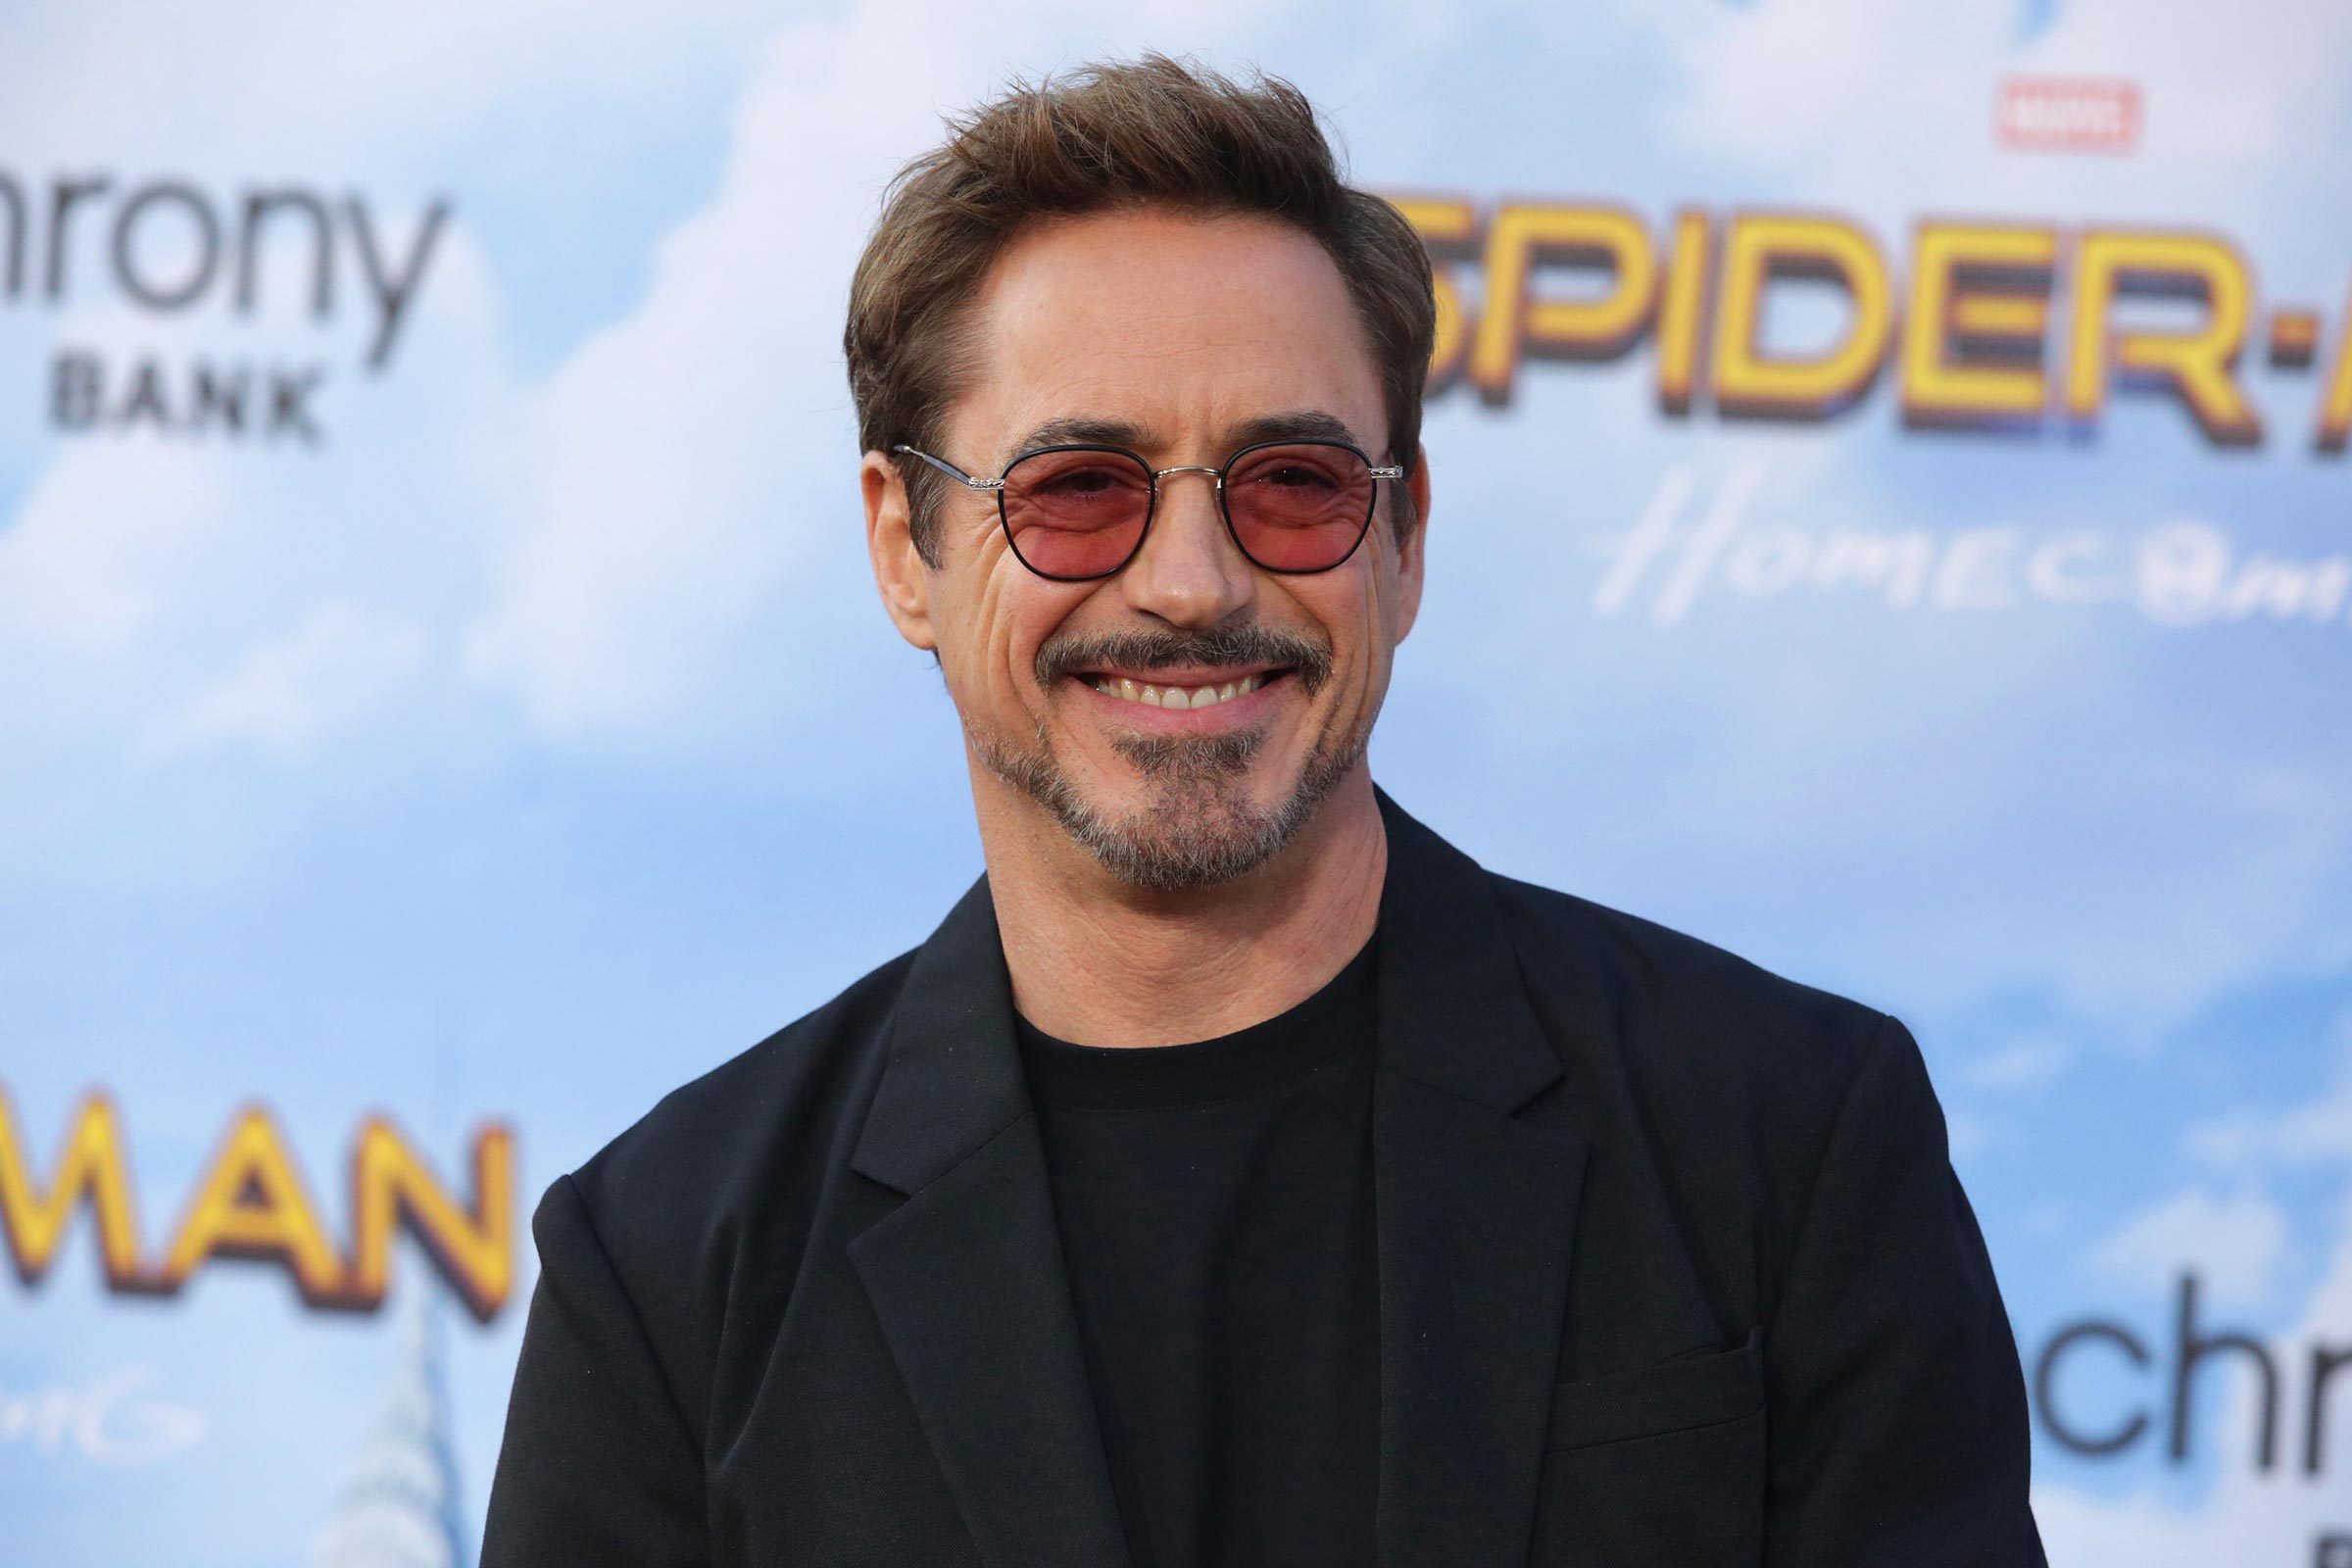 40 Hairstyles to Channel Your Inner Tony Stark: Taking Inspiration from Robert Downey Jr.’s Looks